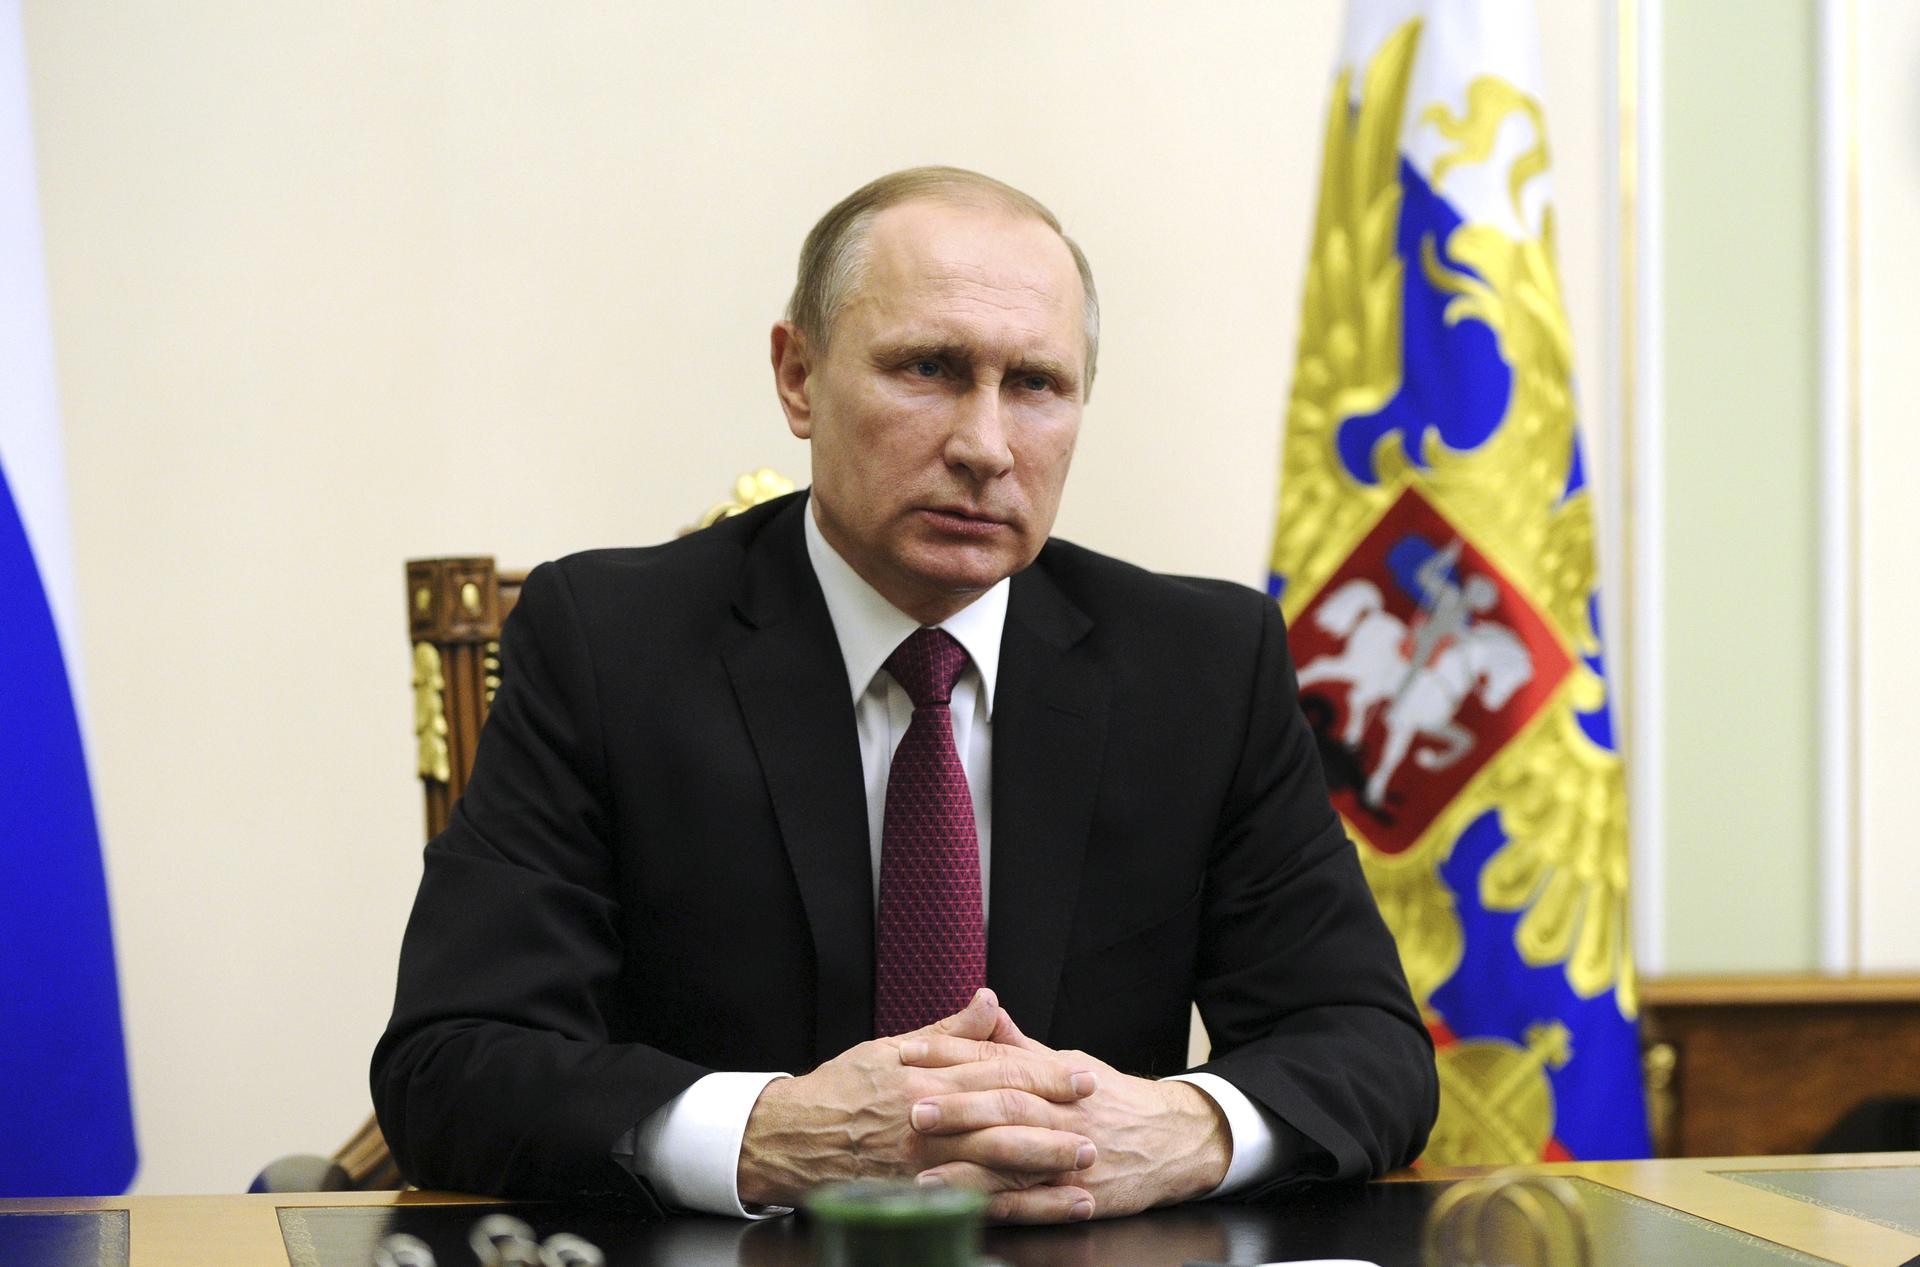 Russia President Vladimir Putin makes a statement in Moscow region, Russia, February 22, 2016.